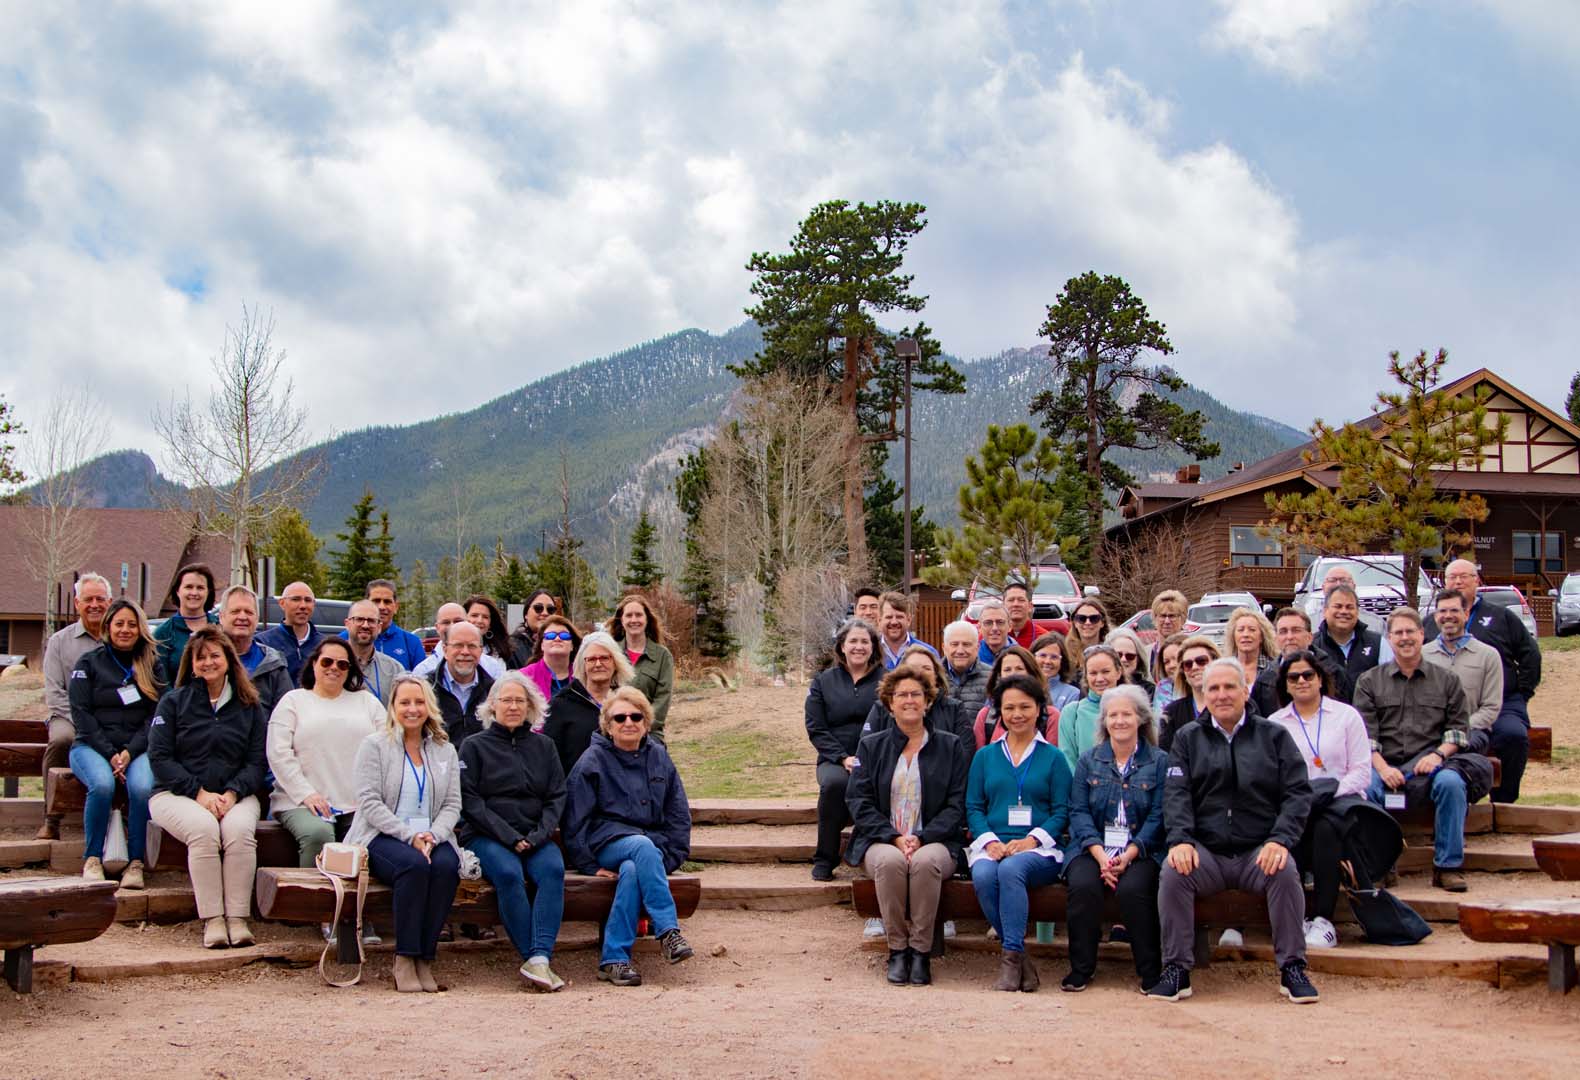 Group of people posing for a photo outside in front of cabins